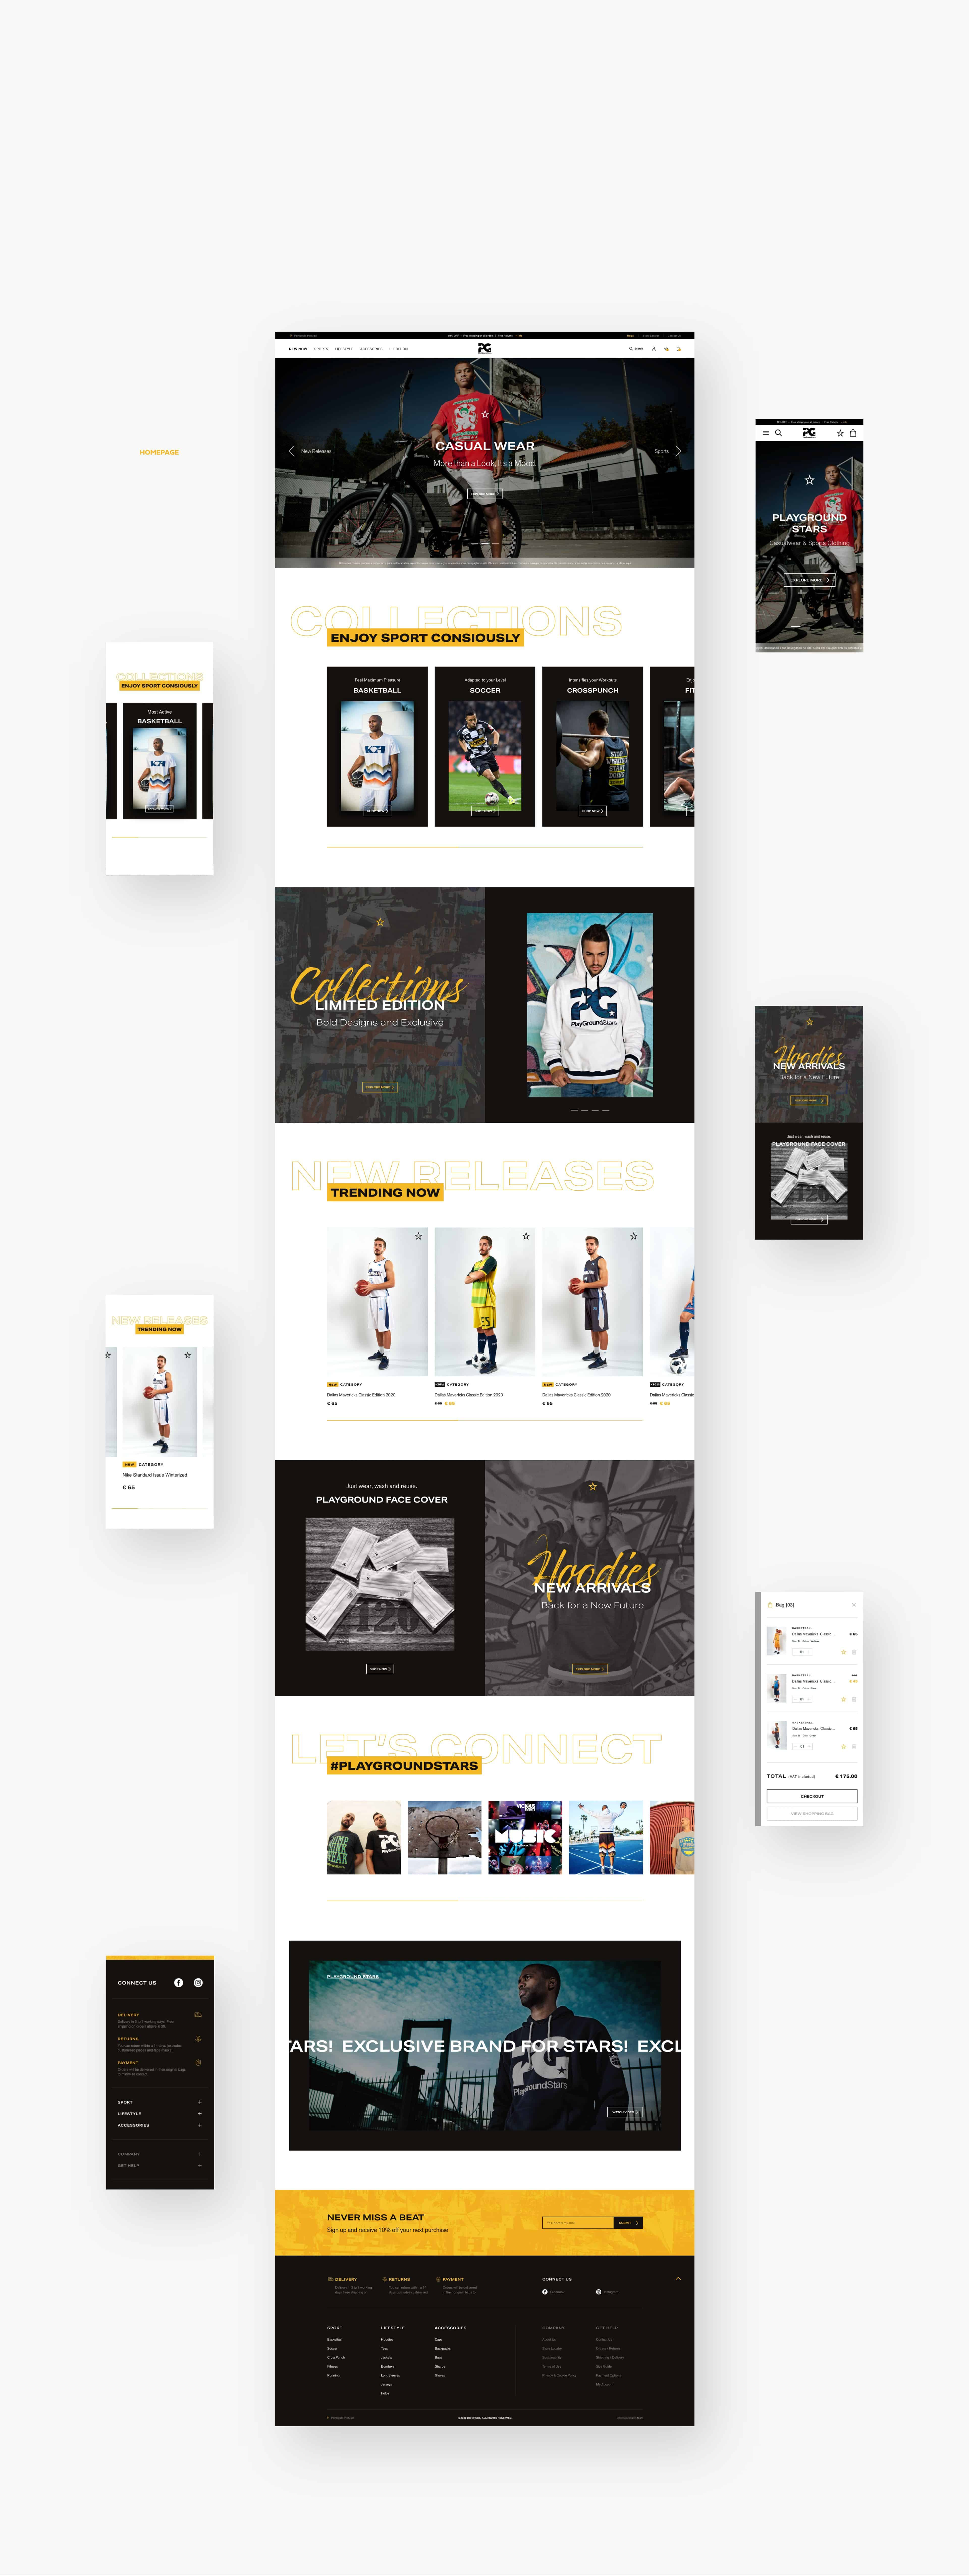 layout developed for online store